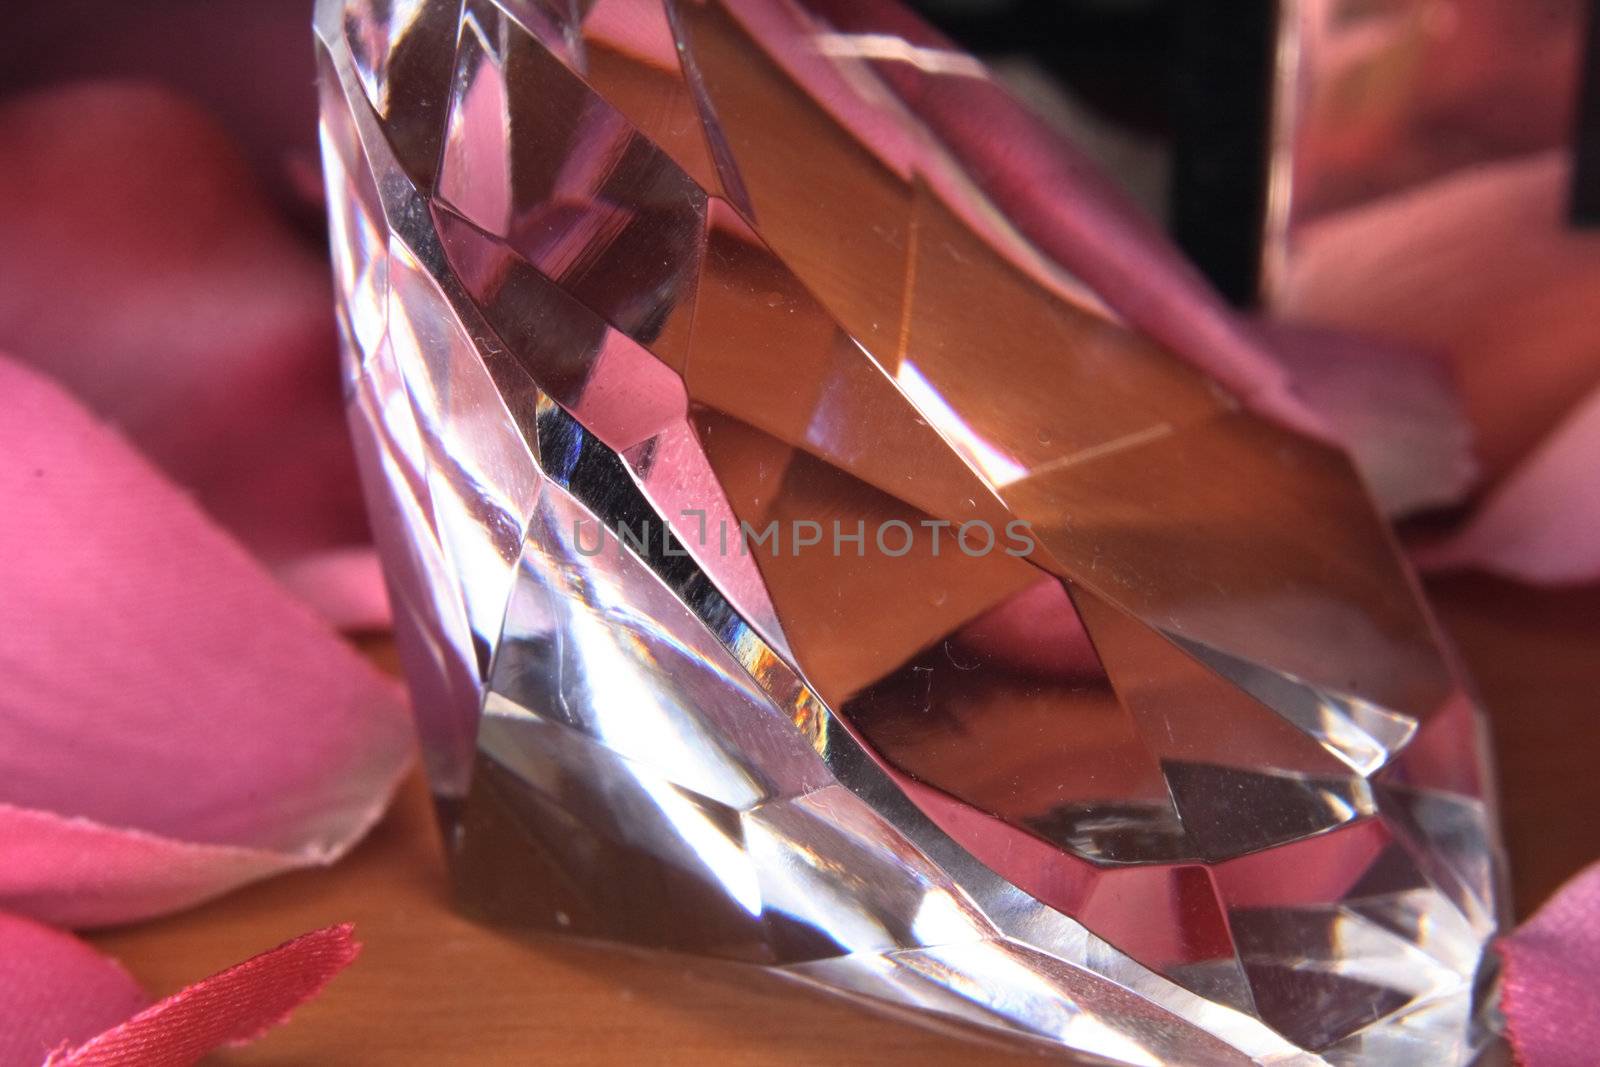 detail of shiny diamond with peaces of roses